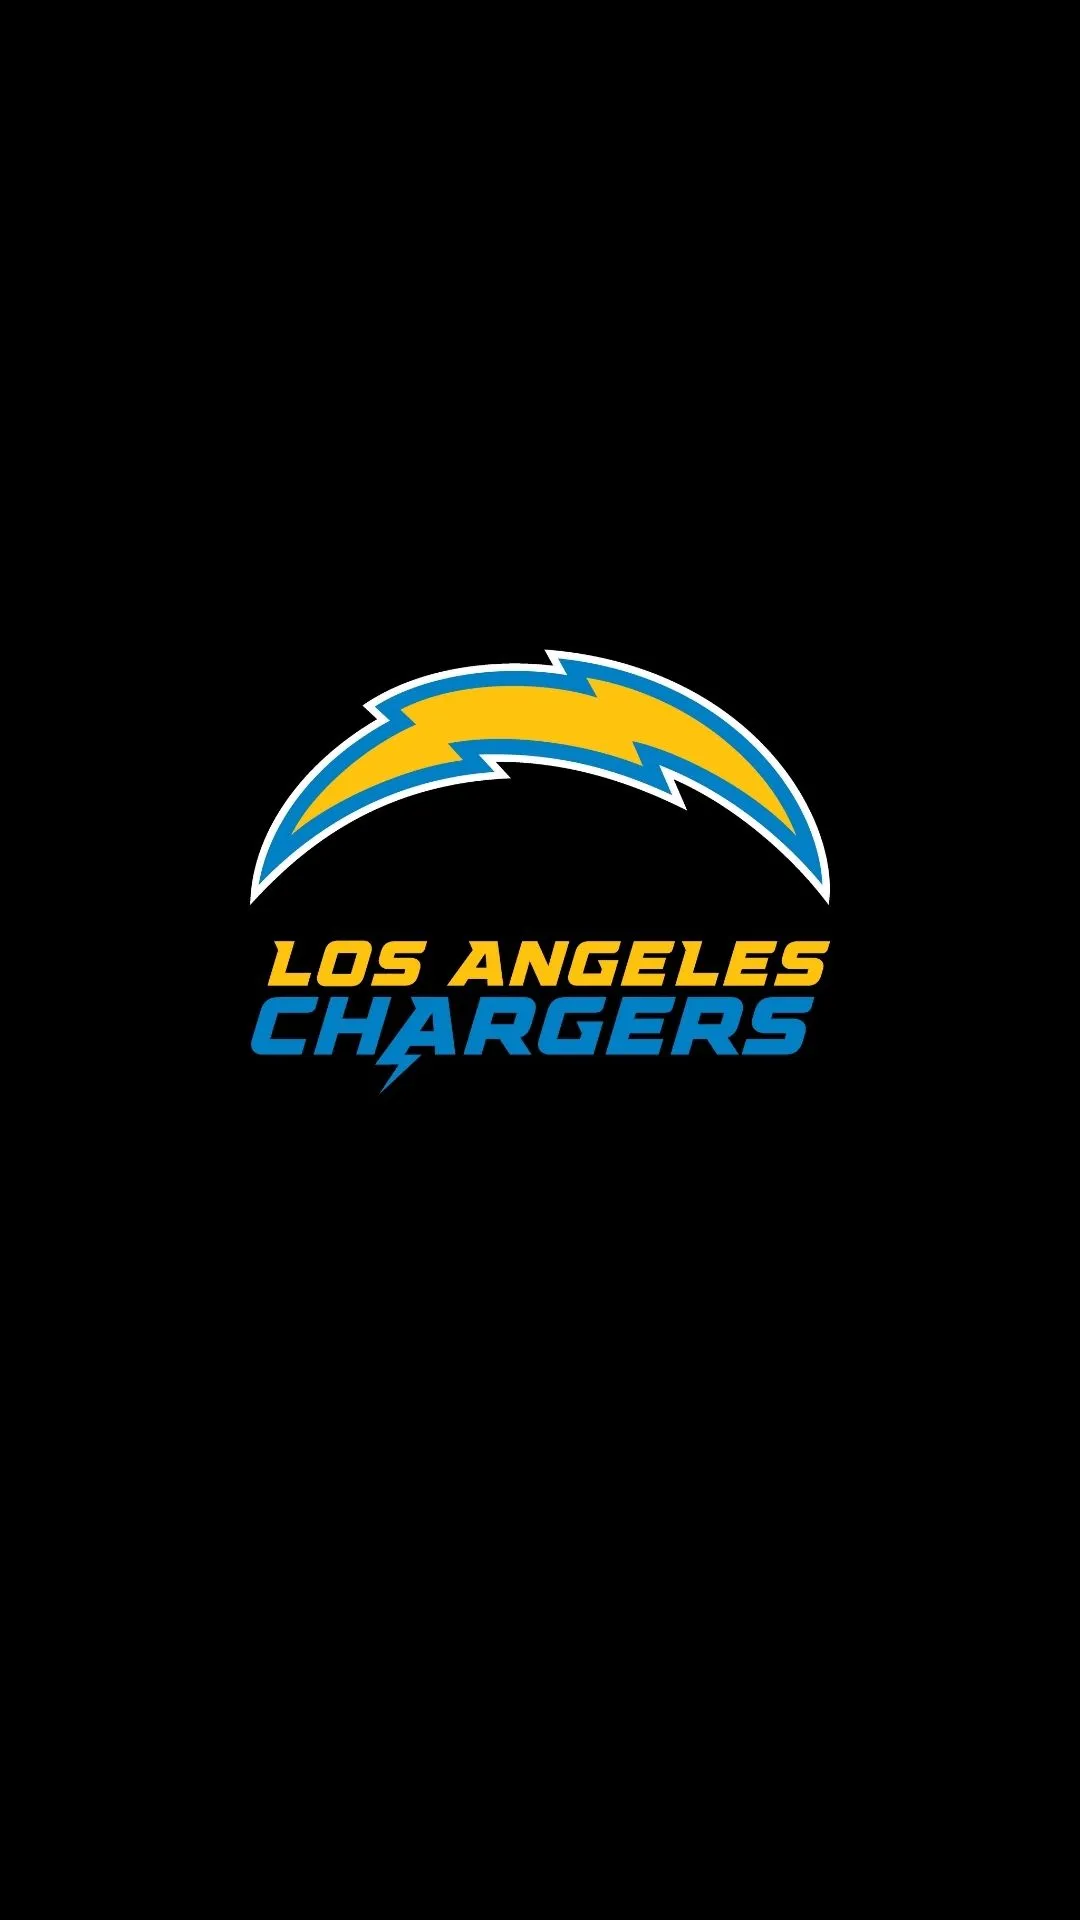 Who is the Owner of LA Chargers?